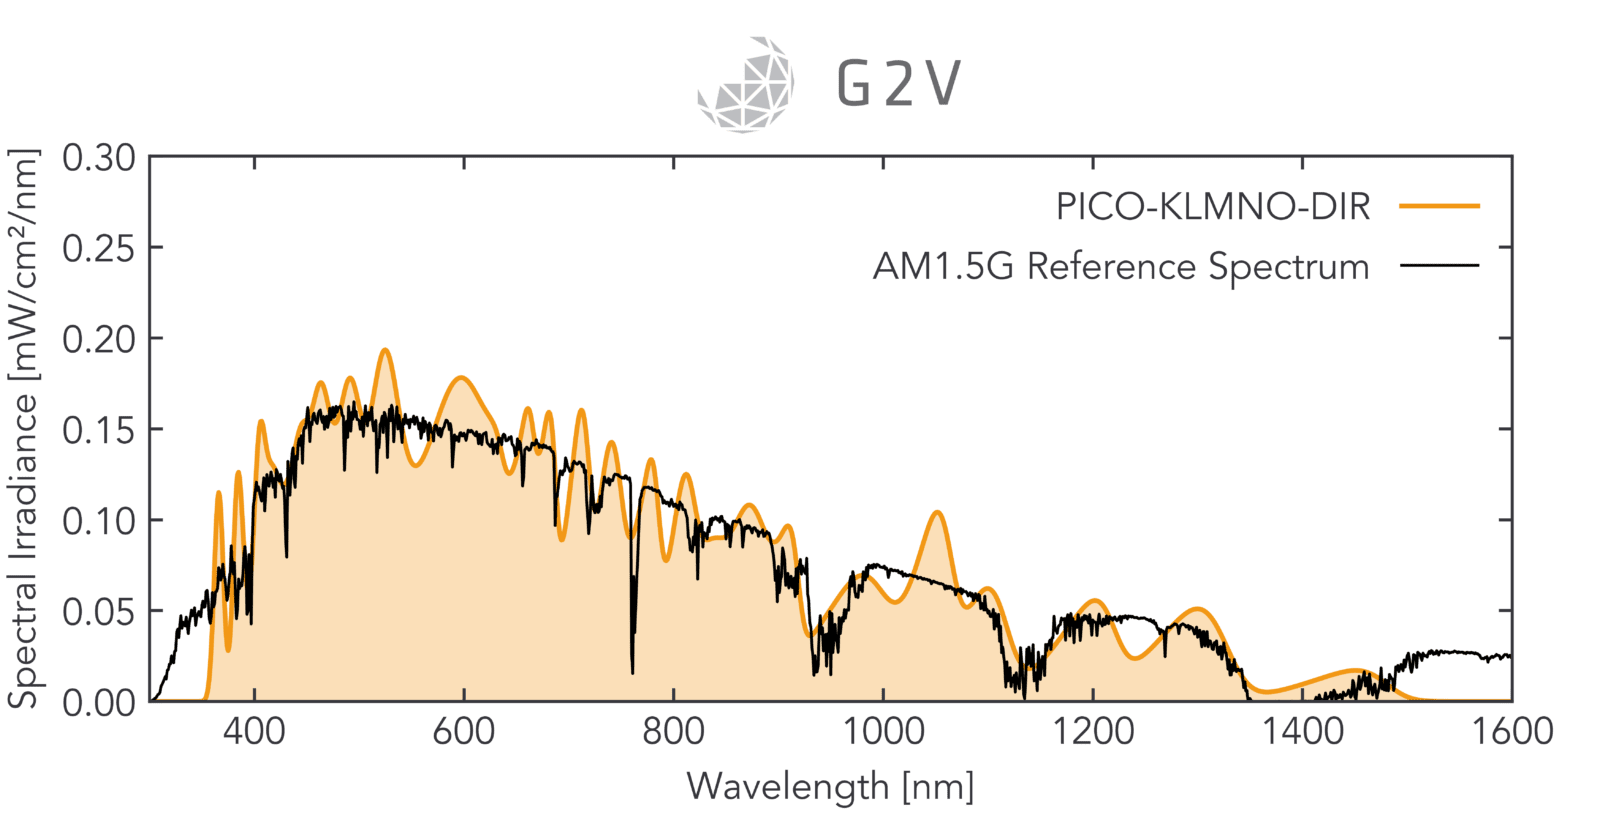 AM1.5G spectral match exceeds ASTM E927-19 requirements by a factor of 5x. Variable spectra available for intensity adjustment, control of up to 32 wavelength channels, and automation via Python API. AM0 and custom spectra available upon request.